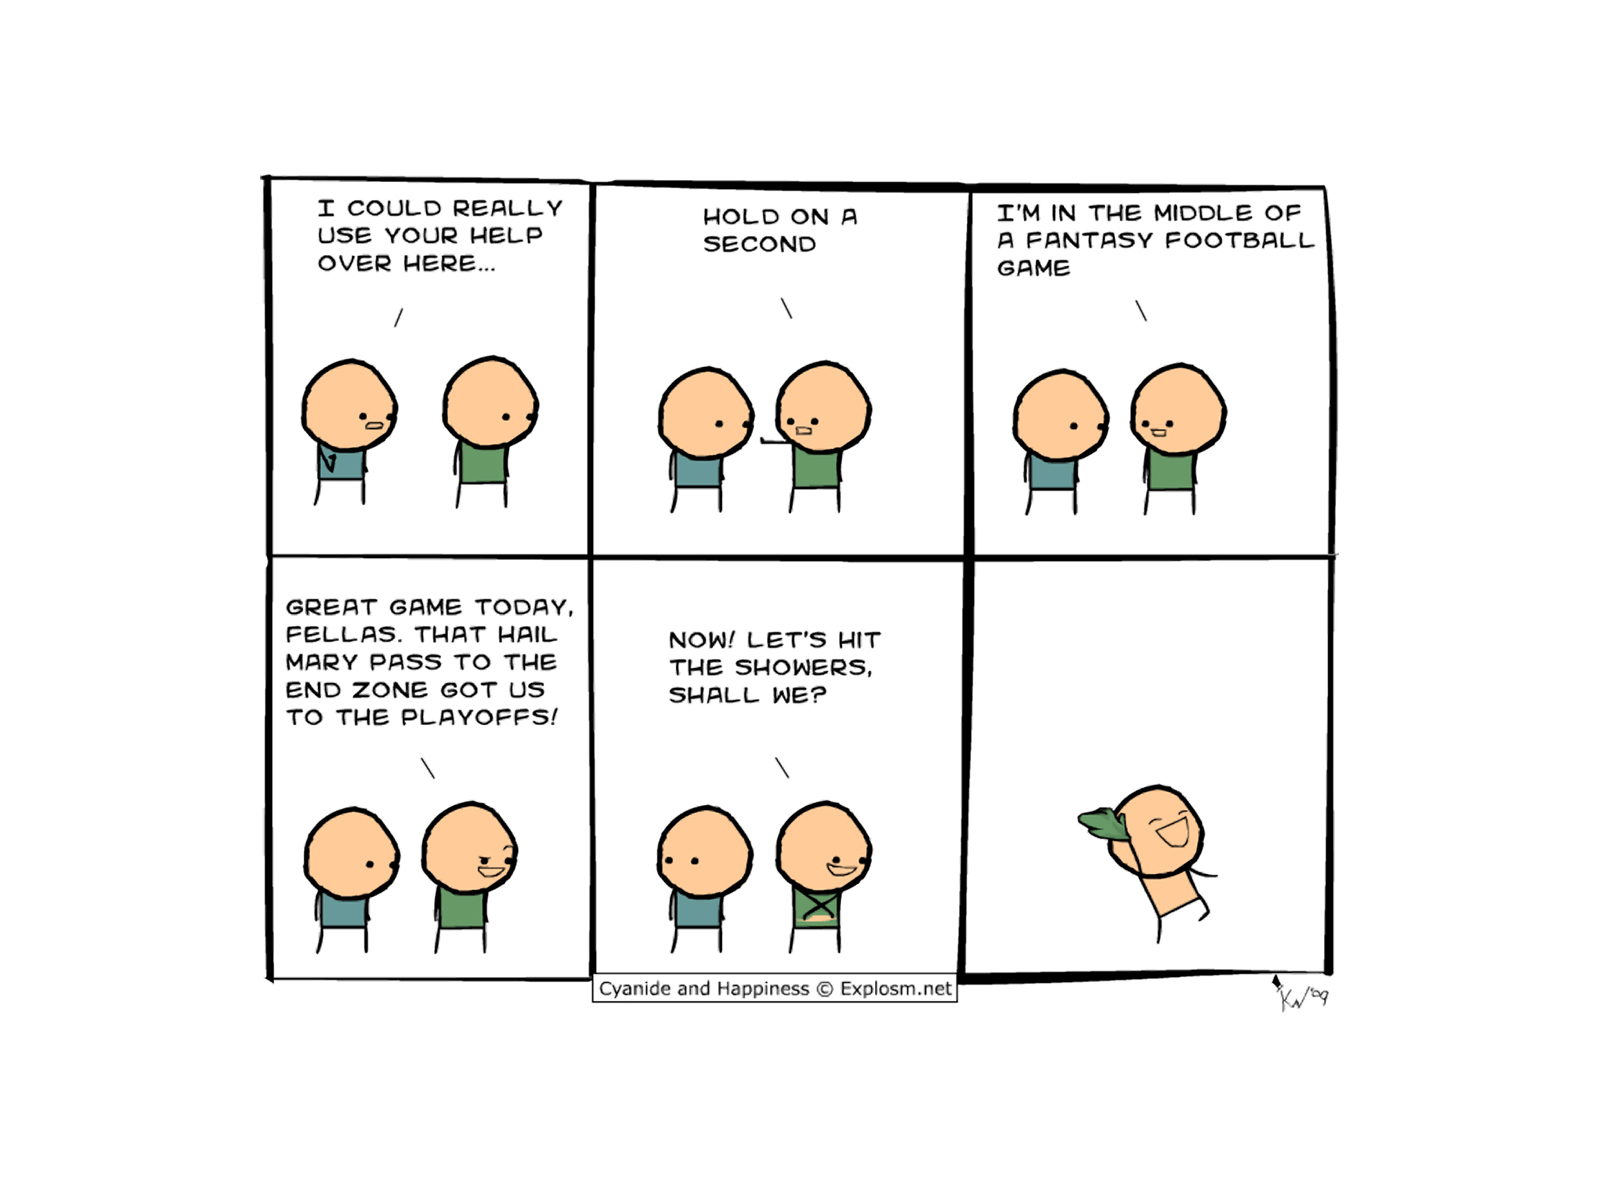 Cyanide and Happiness by explosm.net